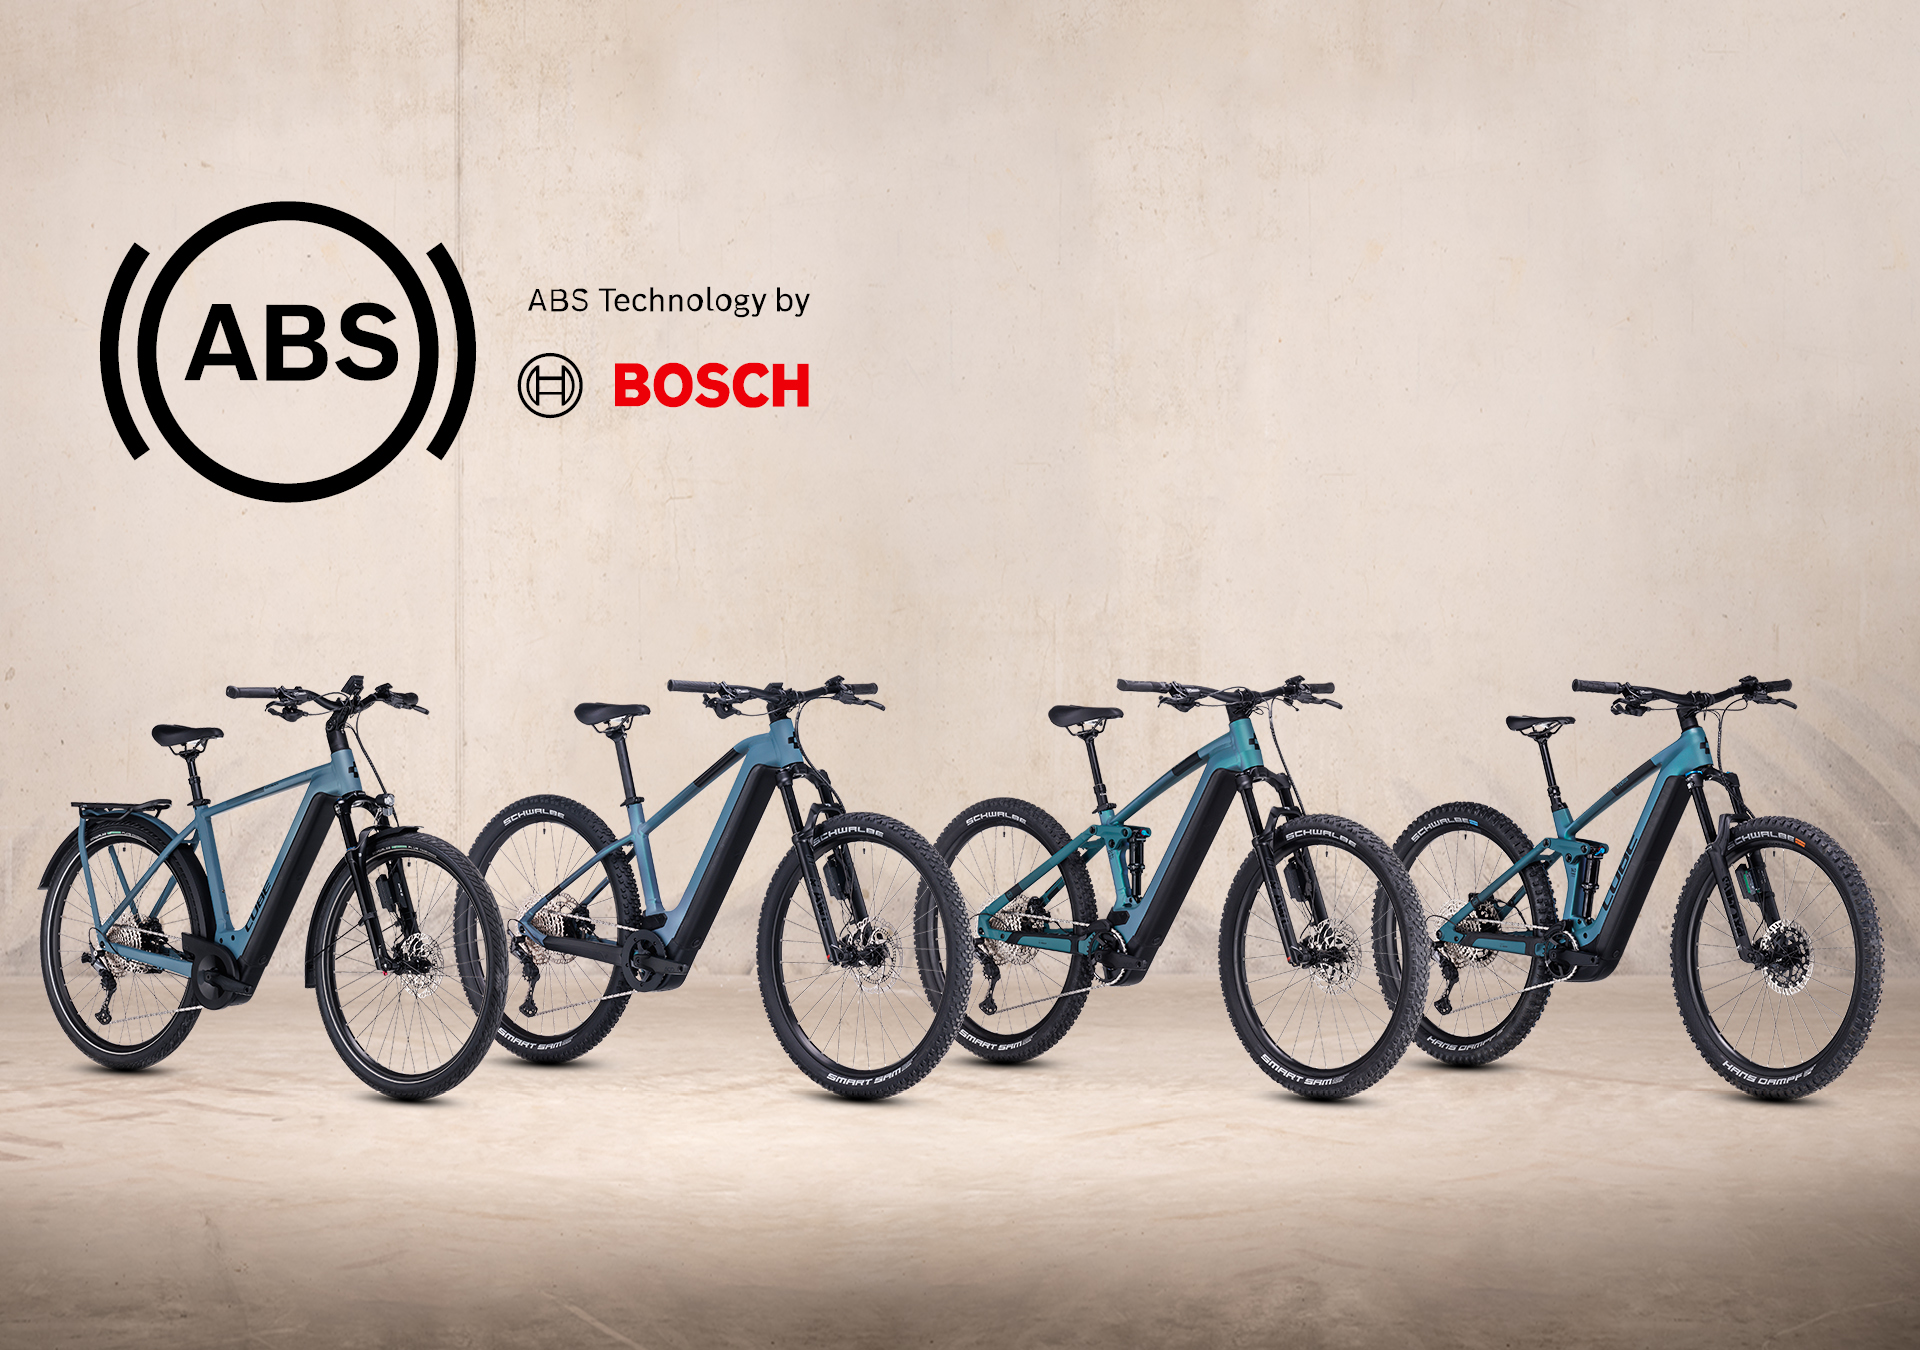 Cube launches four new e-bikes equipped with an ABS